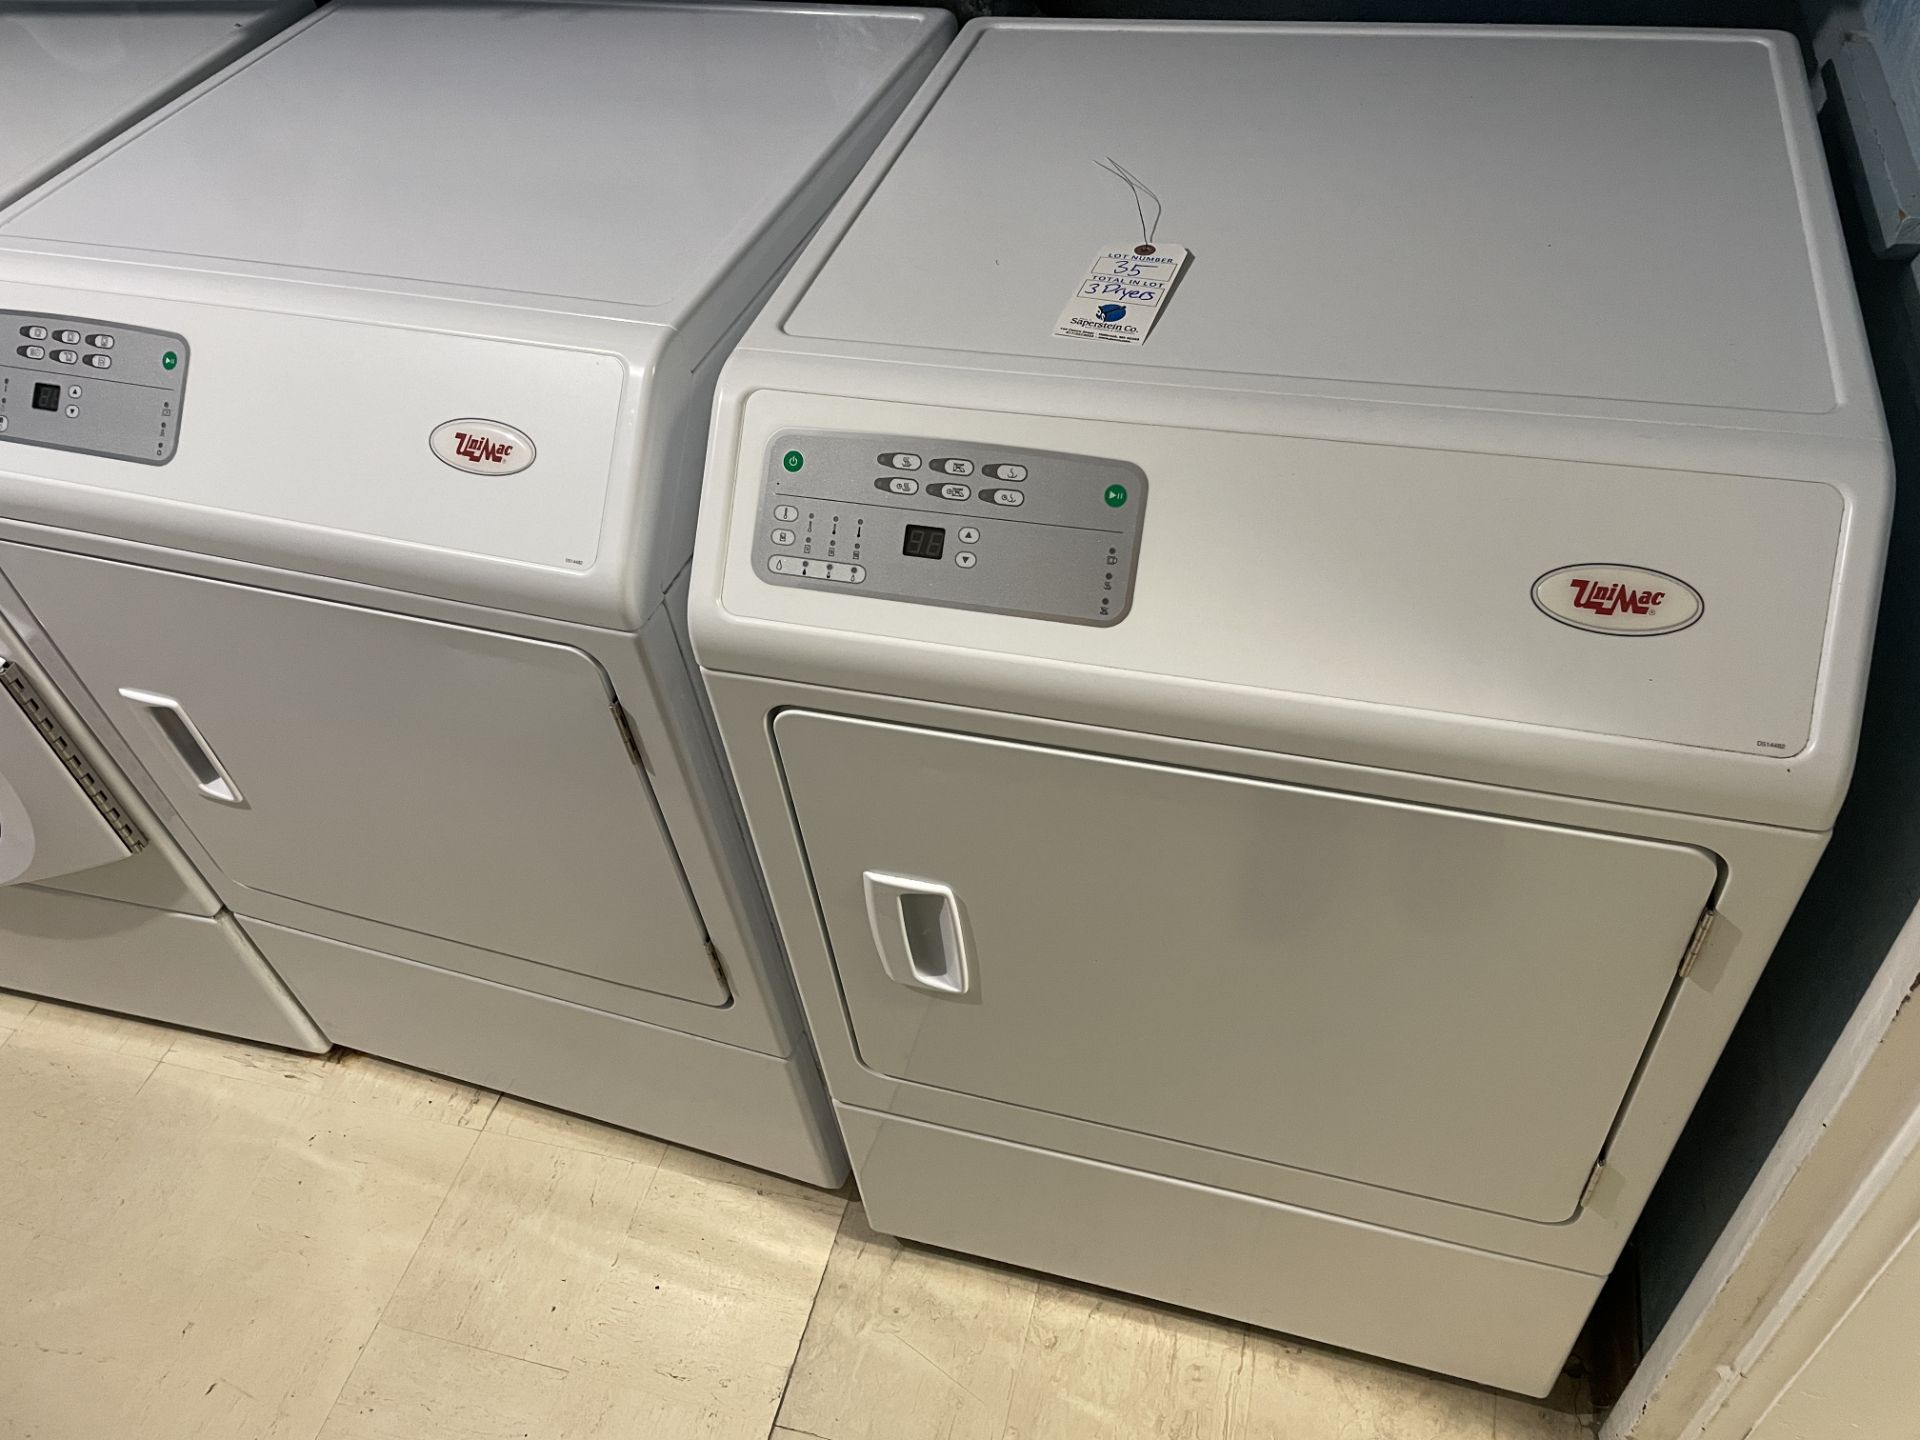 {LOT} In Laundry Area c/o: (3) UniMac #UDEE5BGS173CW01 Electric 3 Wire Plus Ground Commercial Dryers